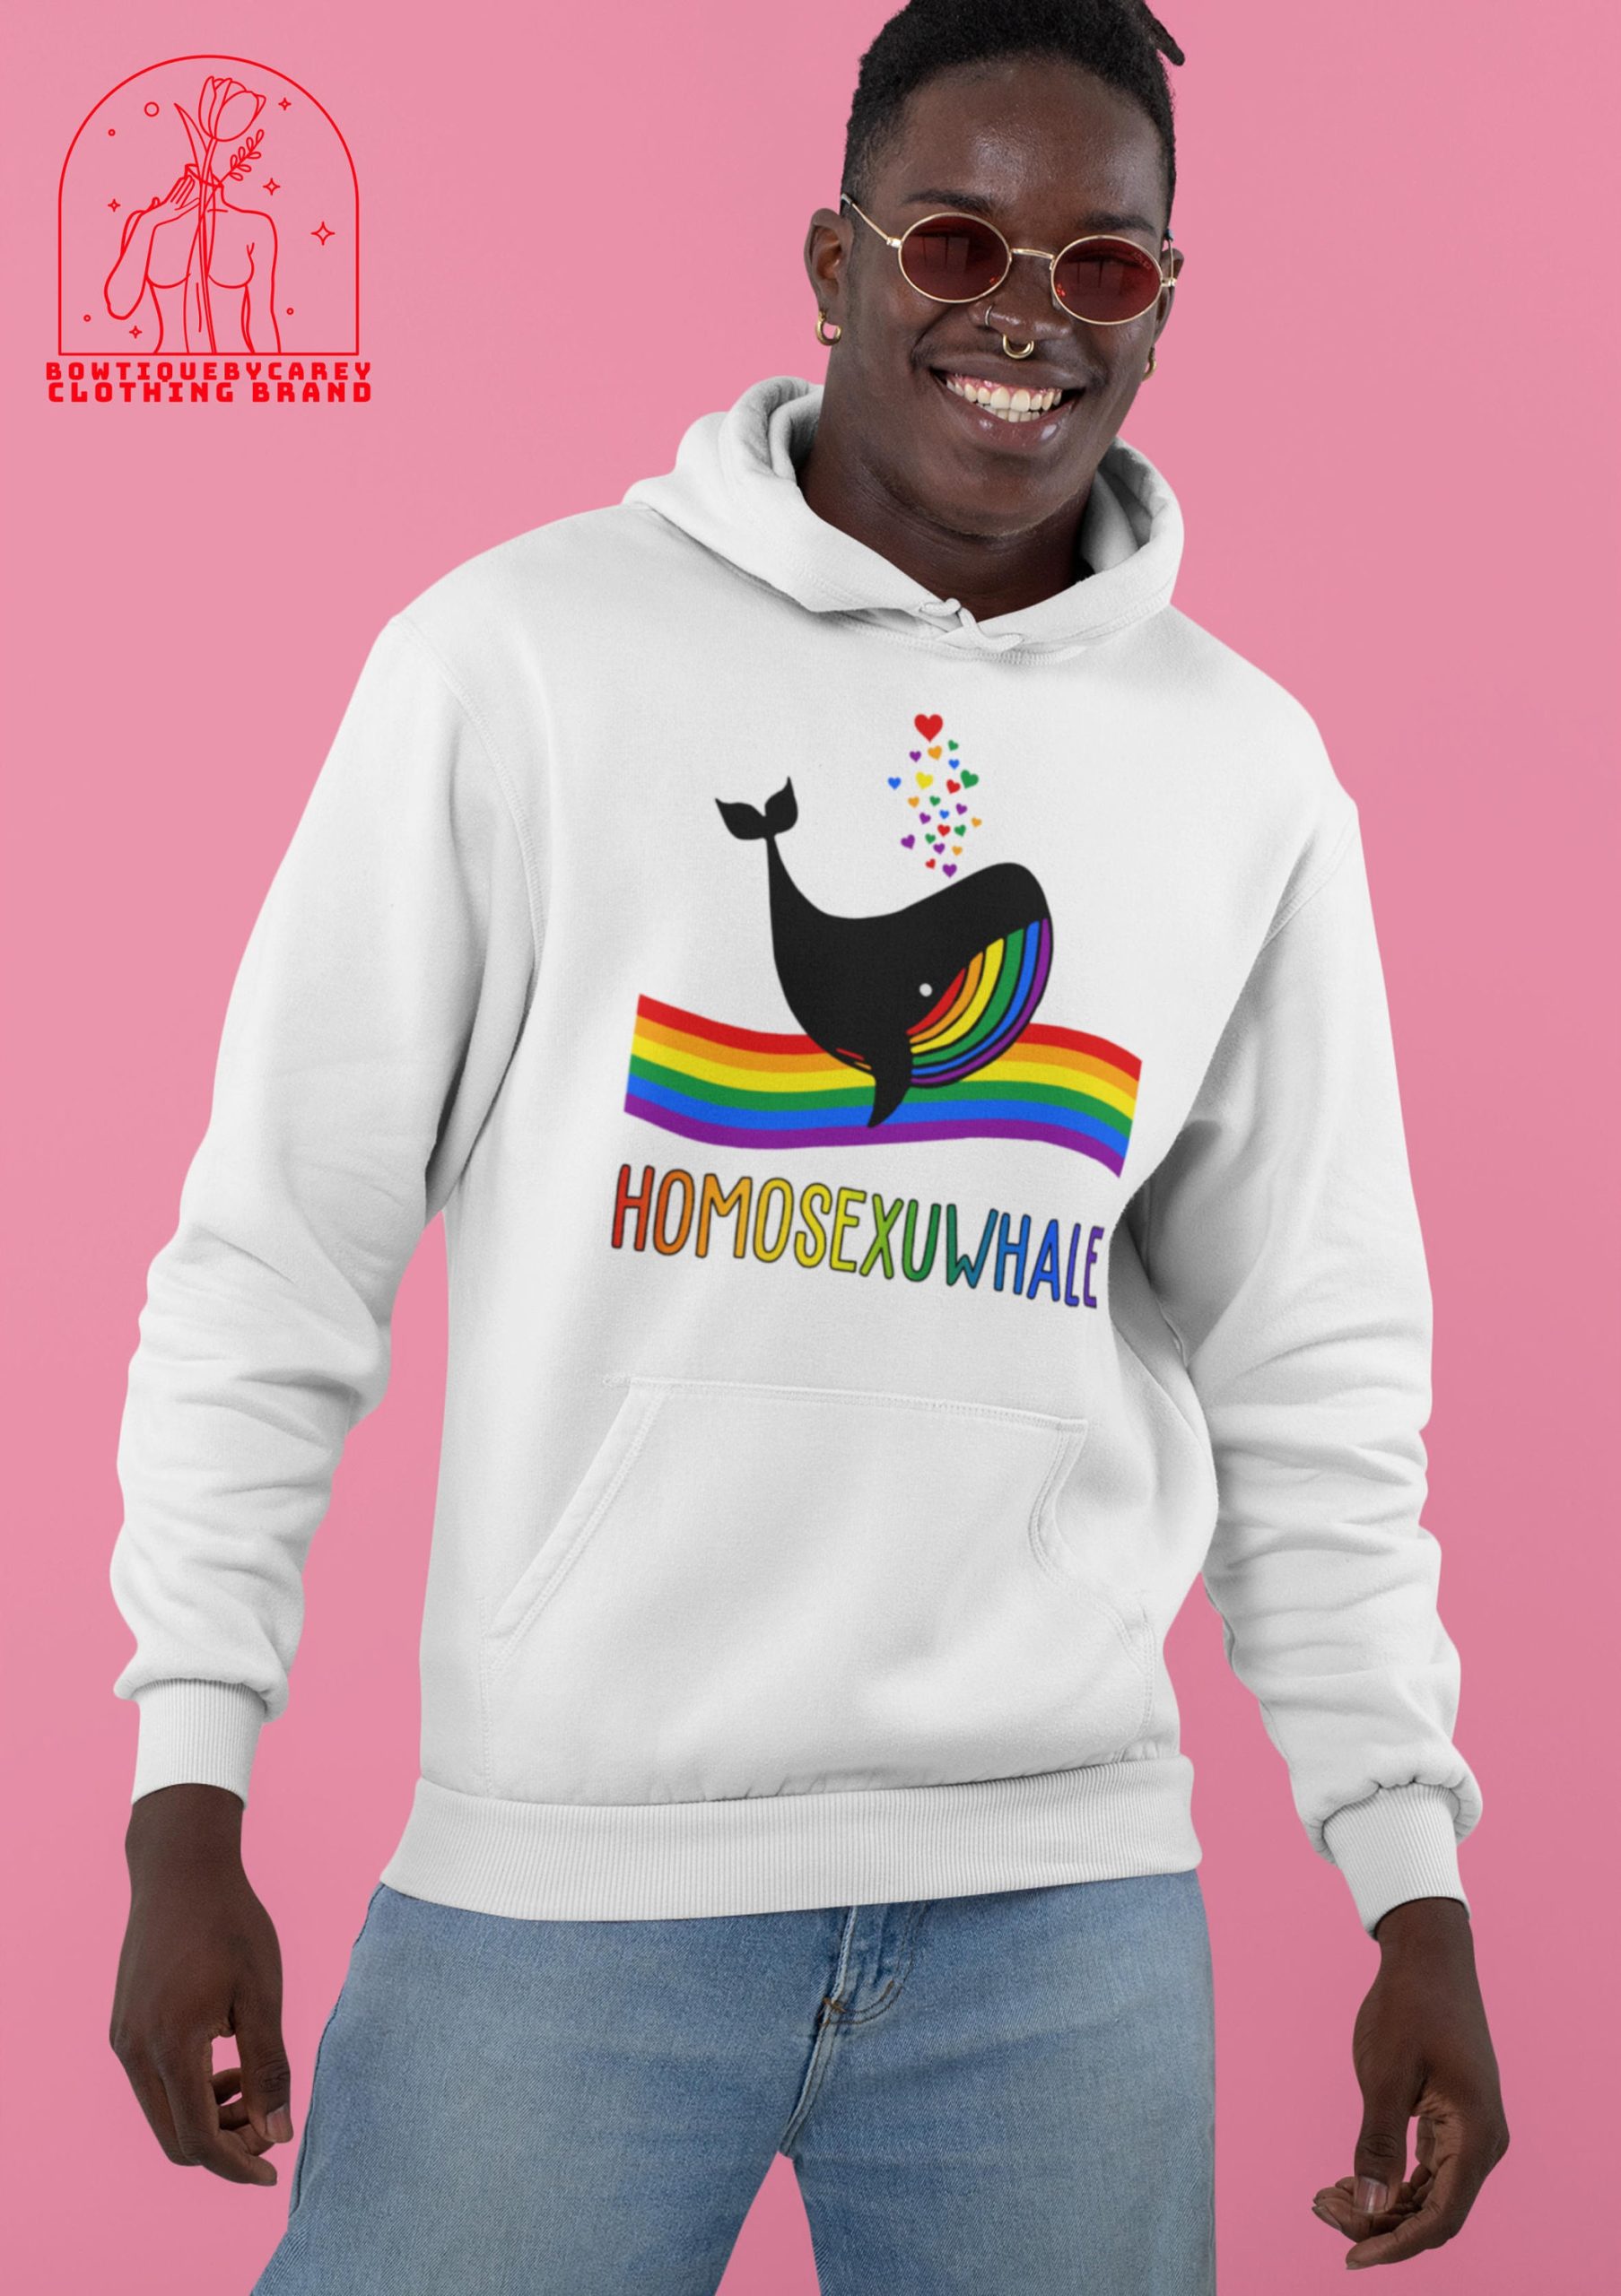 Rainbow Homosexuwhale Lgbt Whale Lgbt Pride Human Rights Anti Racism Gay Unisex T-Shirt